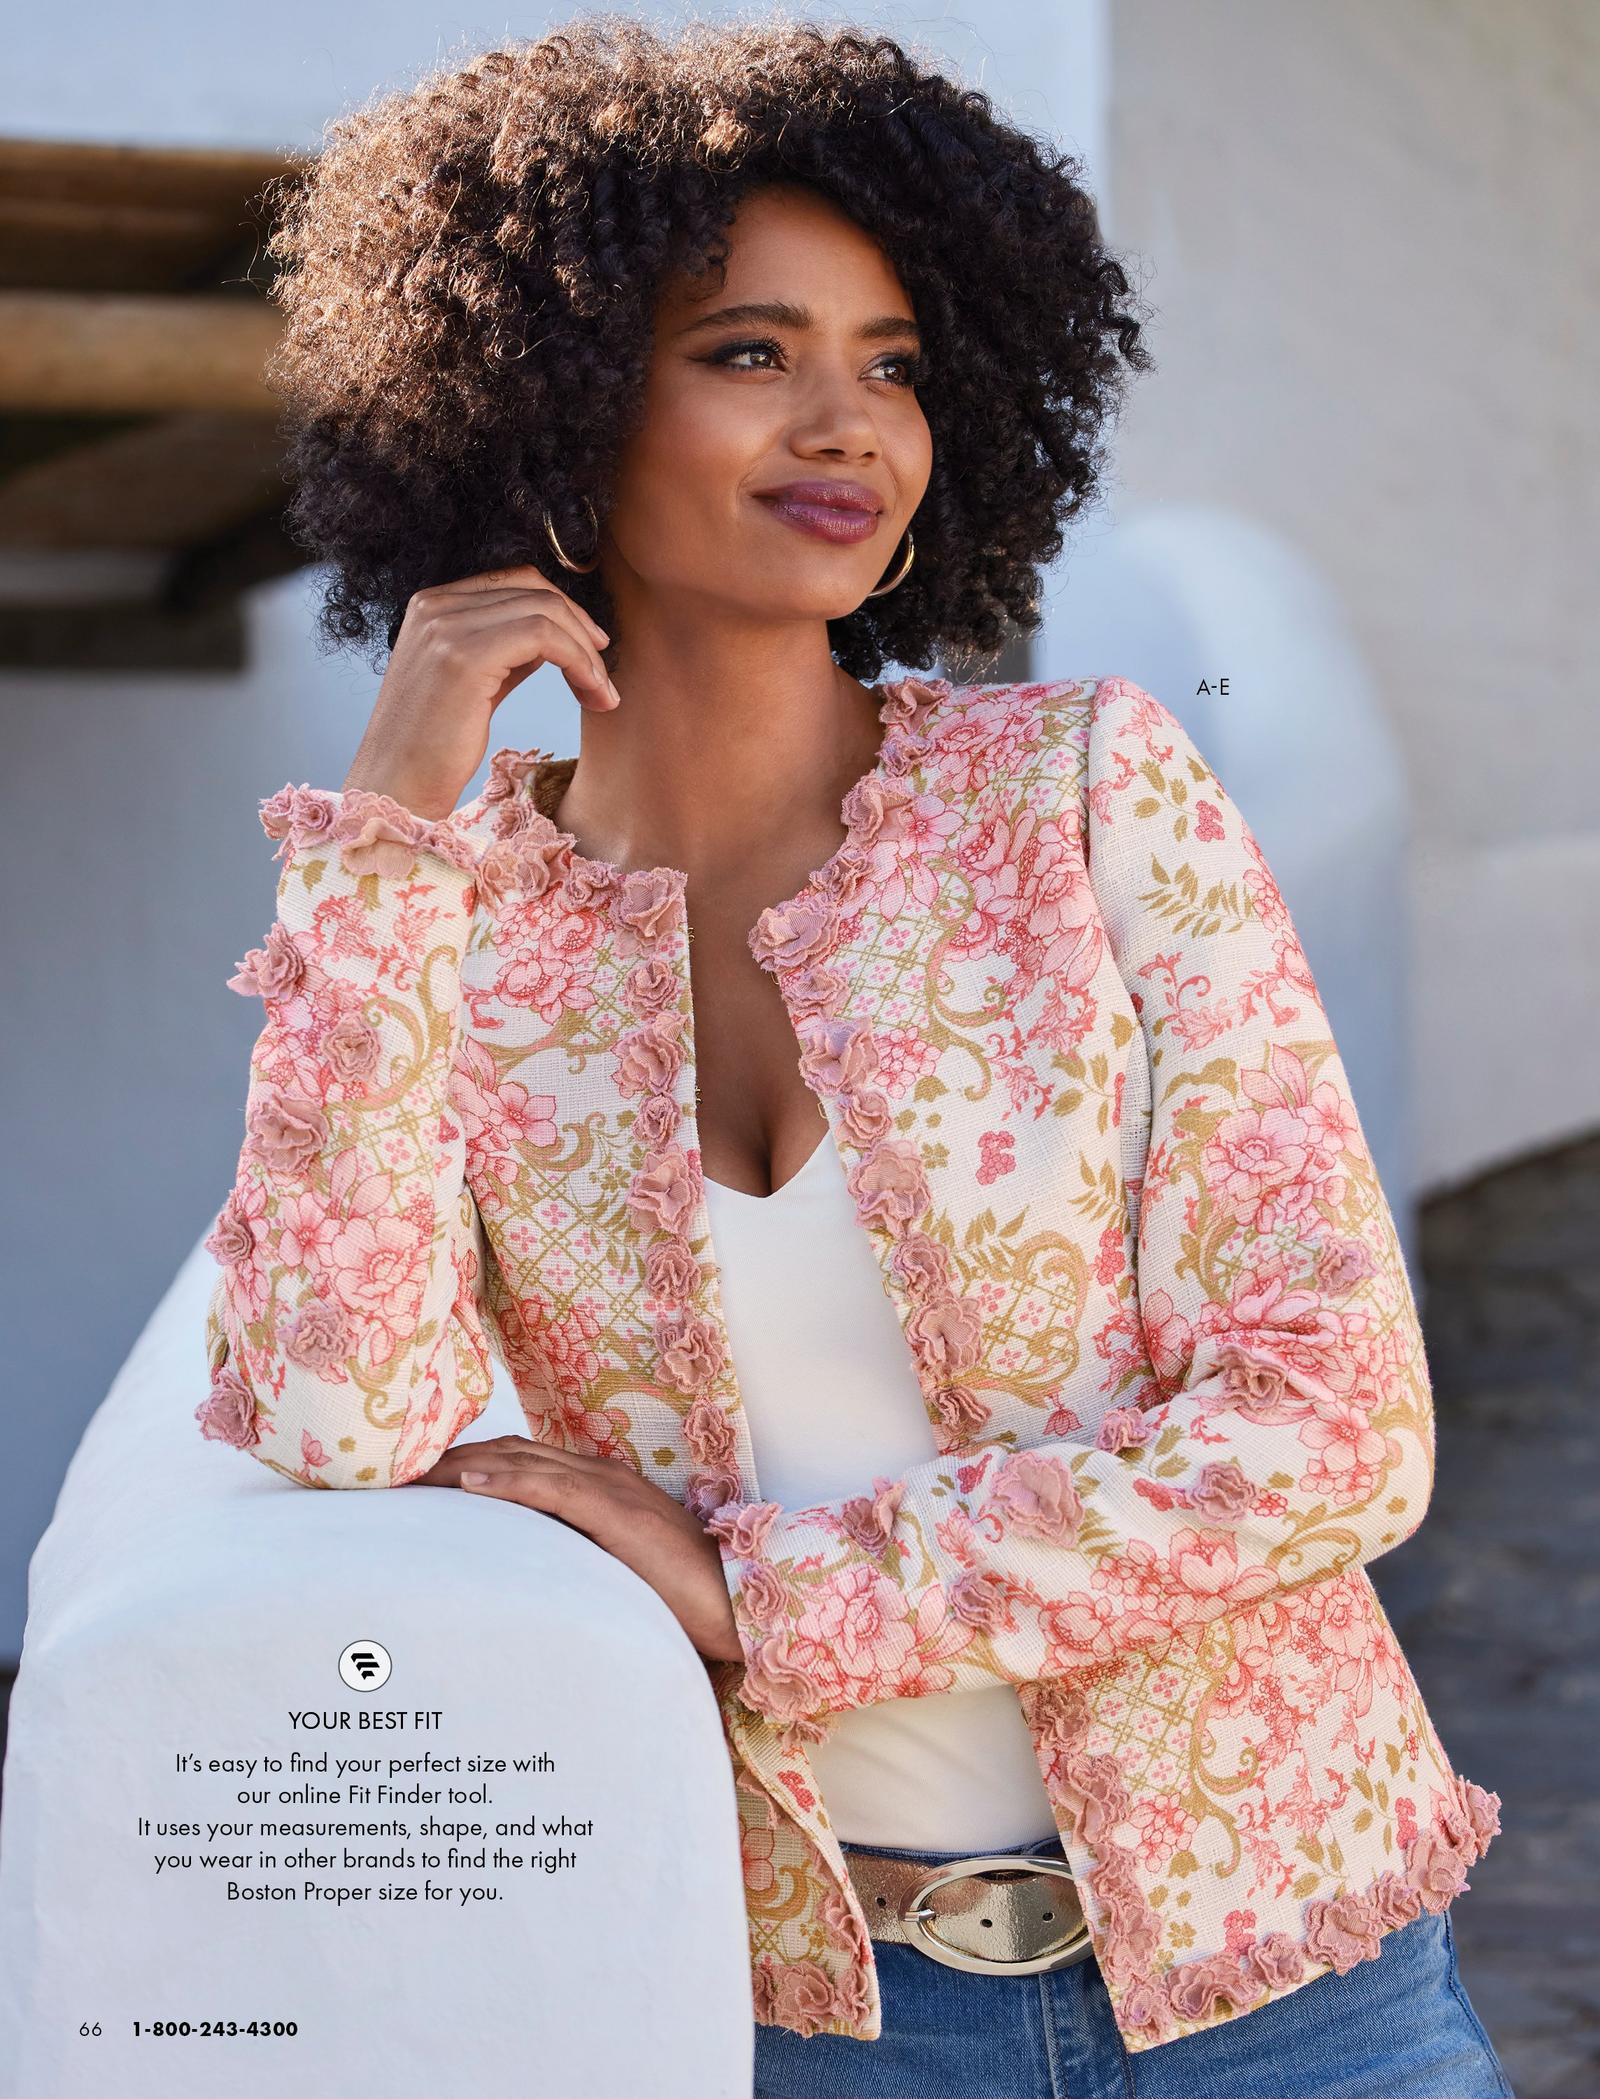 model wearing a pink 3d floral jacket, white v-neck top, gold leather belt, gold hoop earrings, and jeans.